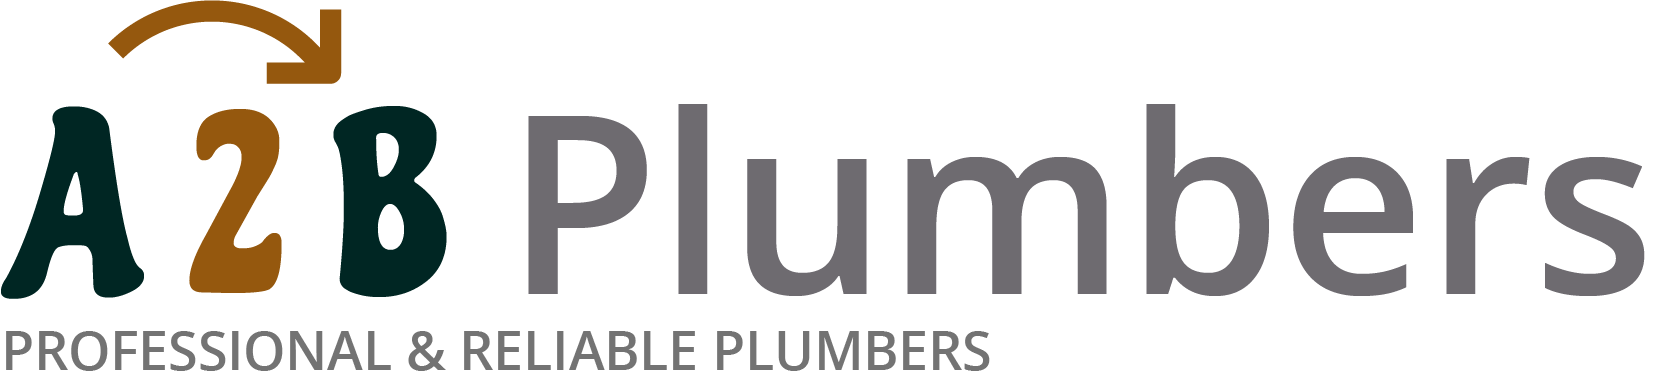 If you need a boiler installed, a radiator repaired or a leaking tap fixed, call us now - we provide services for properties in Portishead and the local area.